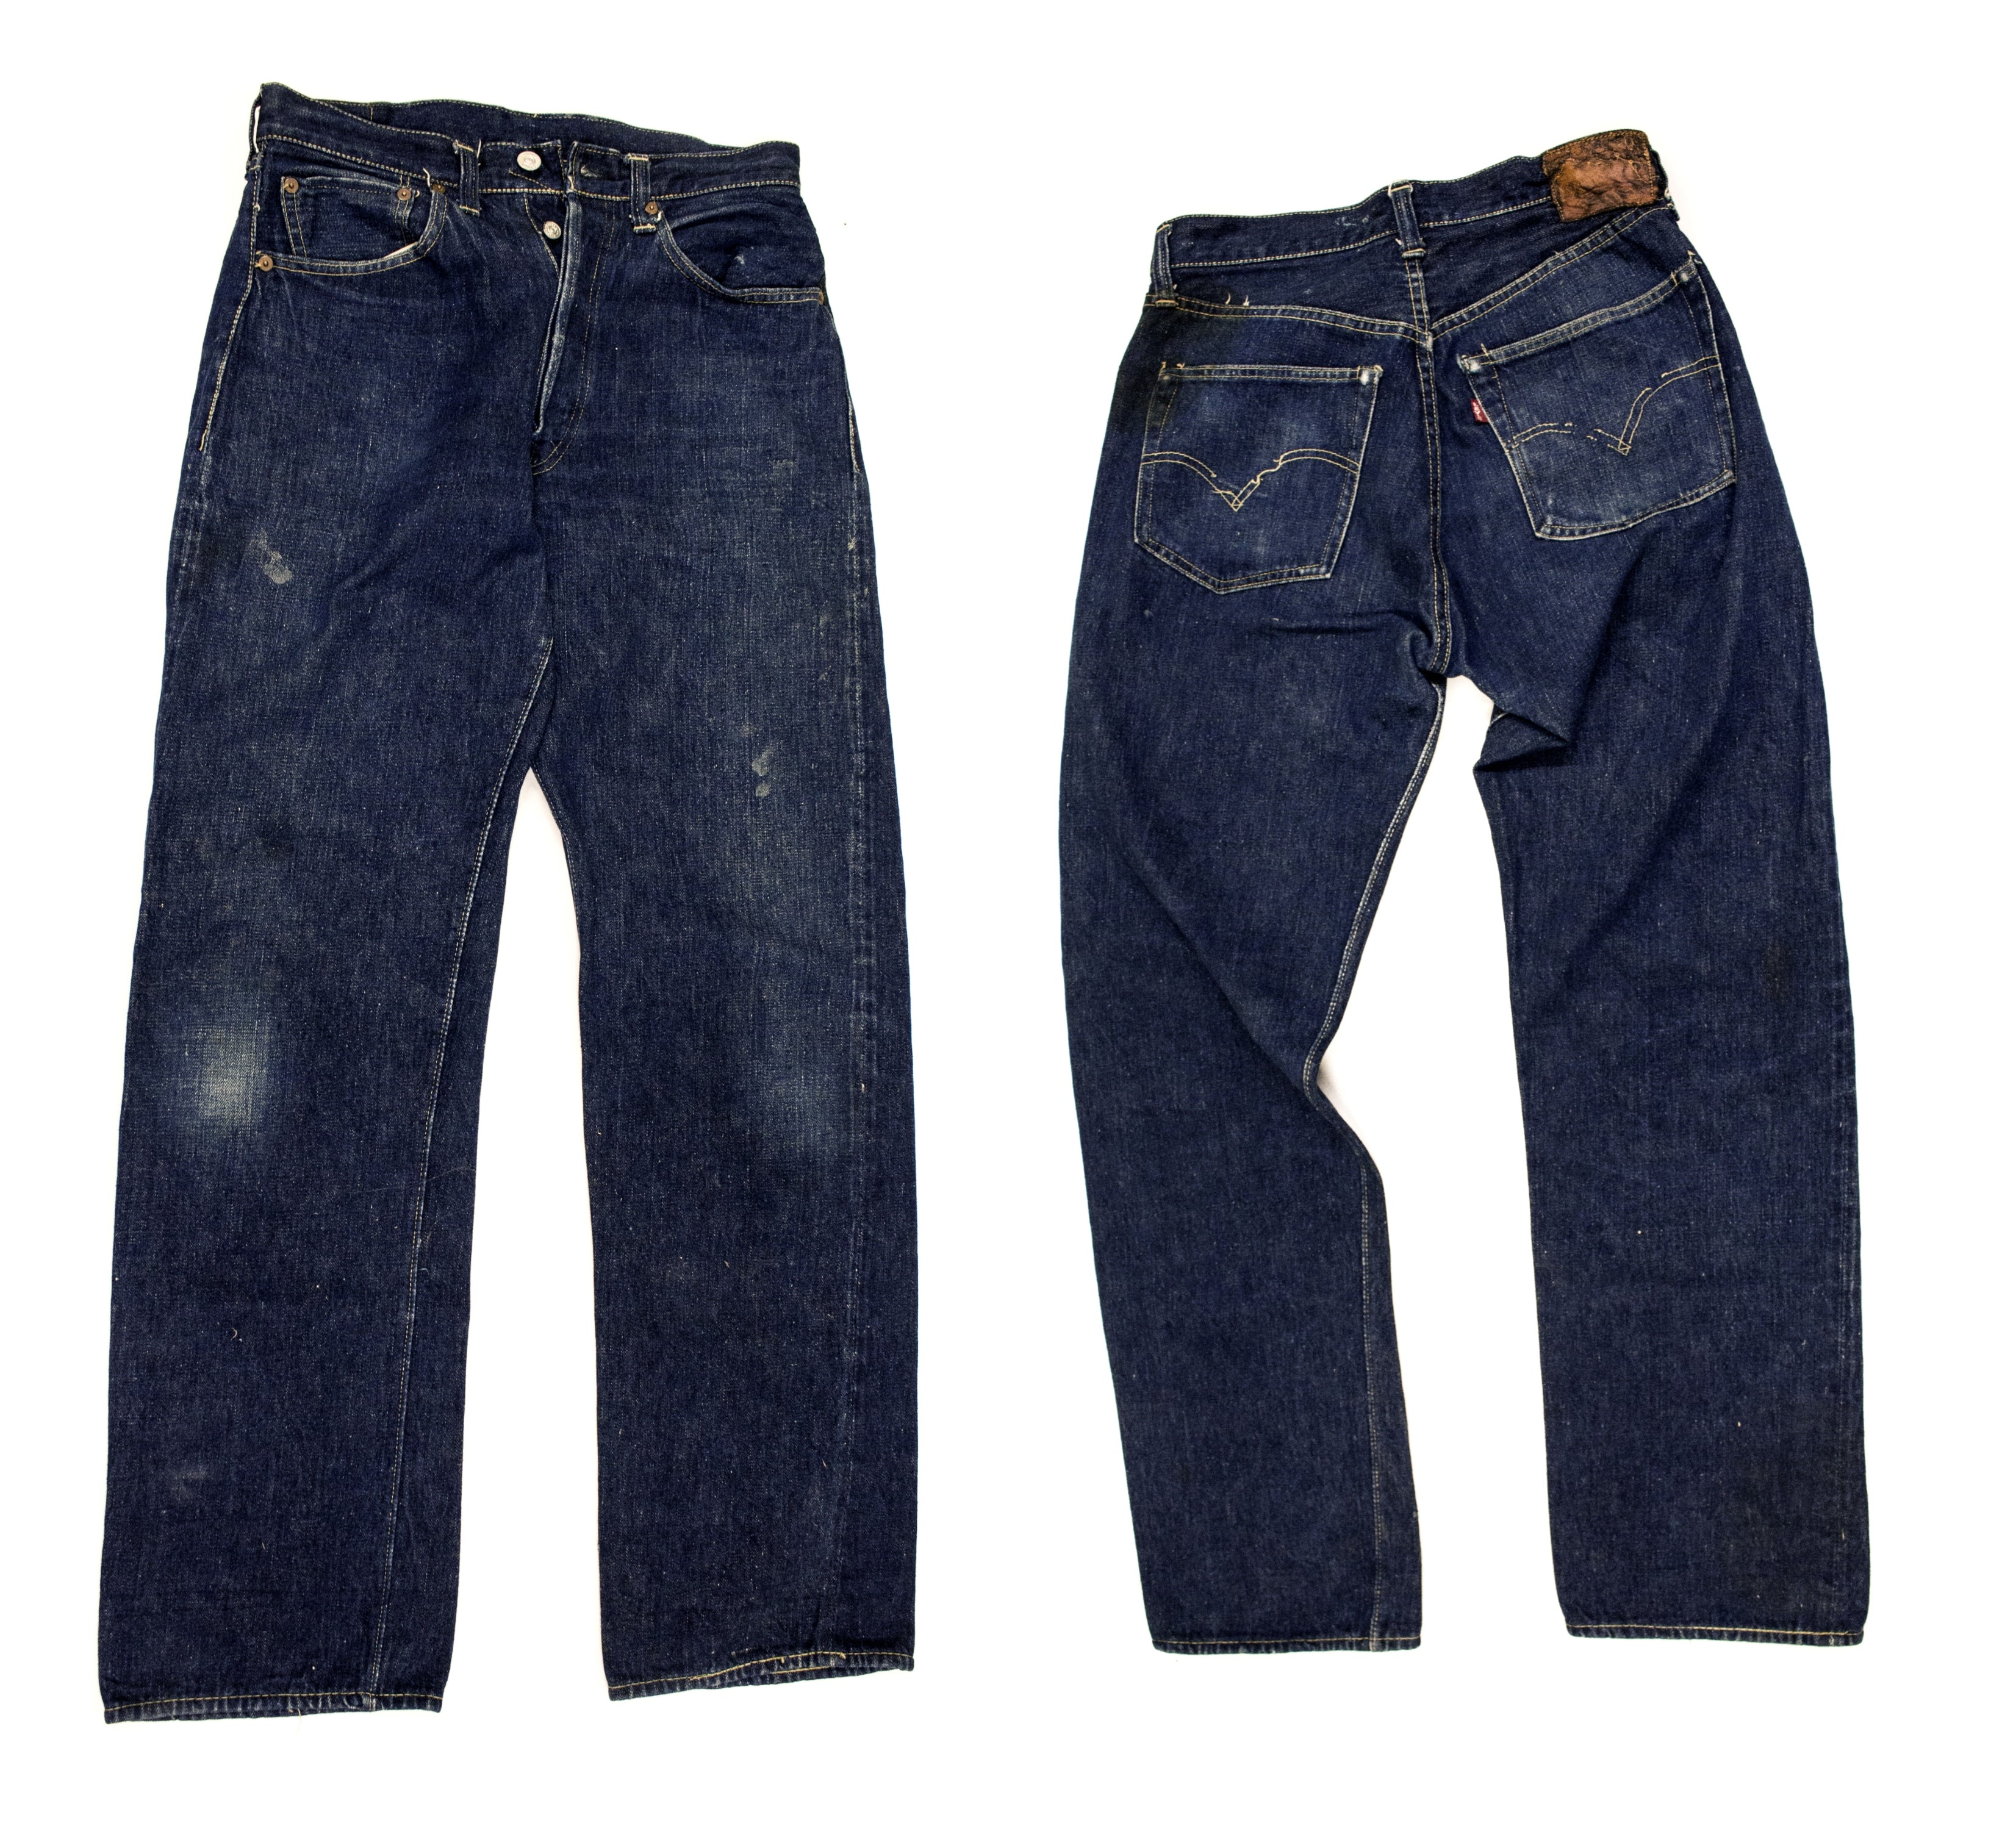 Levi's Vintage Clothing Now Available. - Green Angle Blog